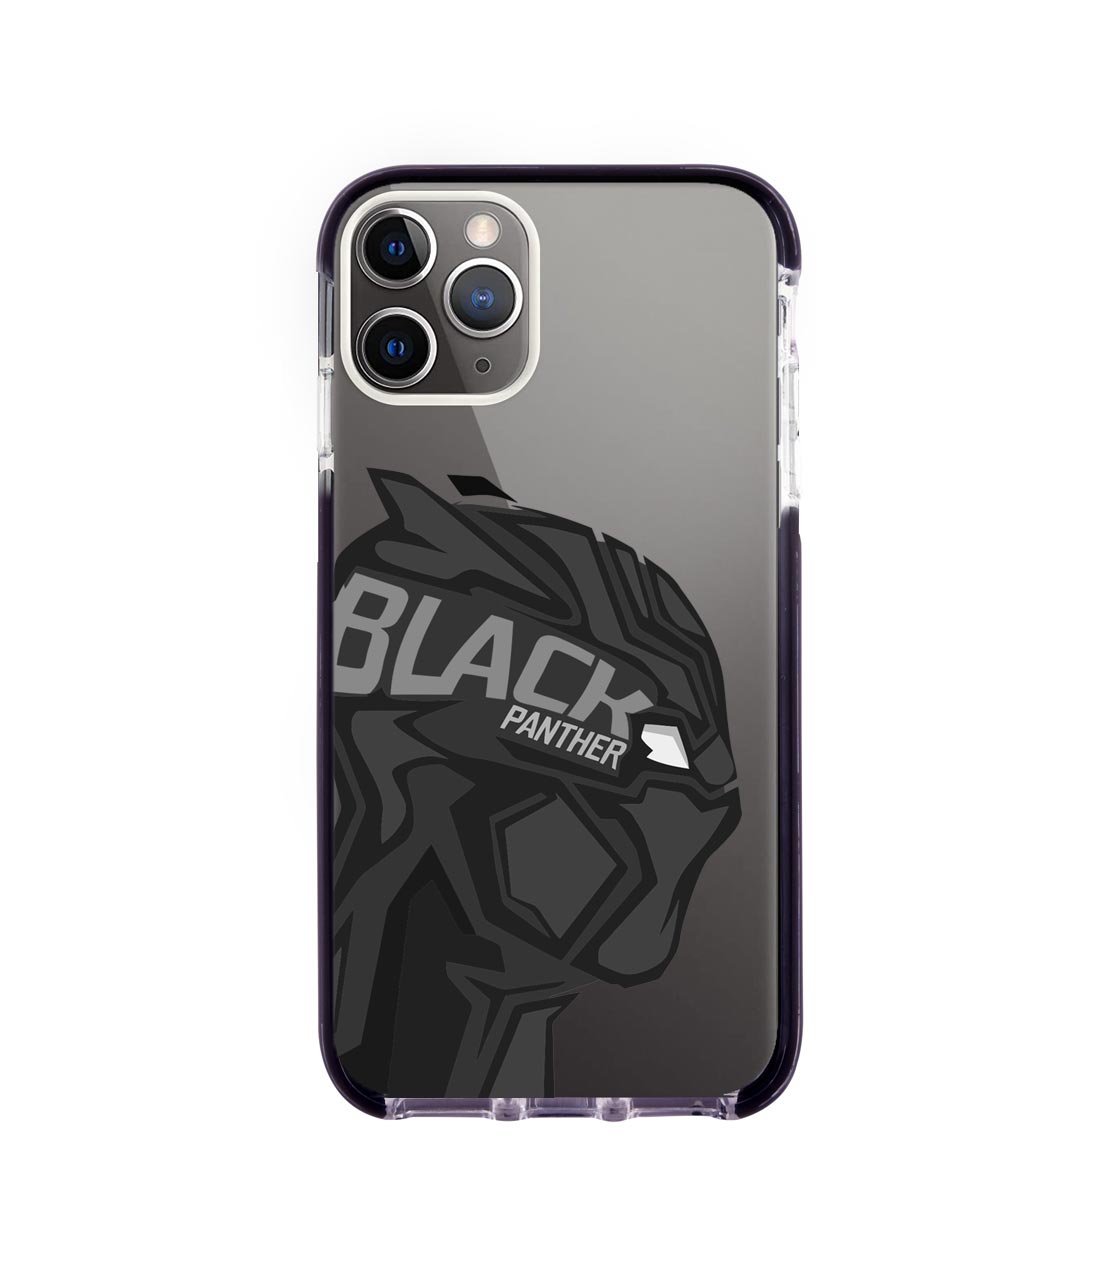 Black Panther Art - Extreme Phone Case for iPhone 11 Pro